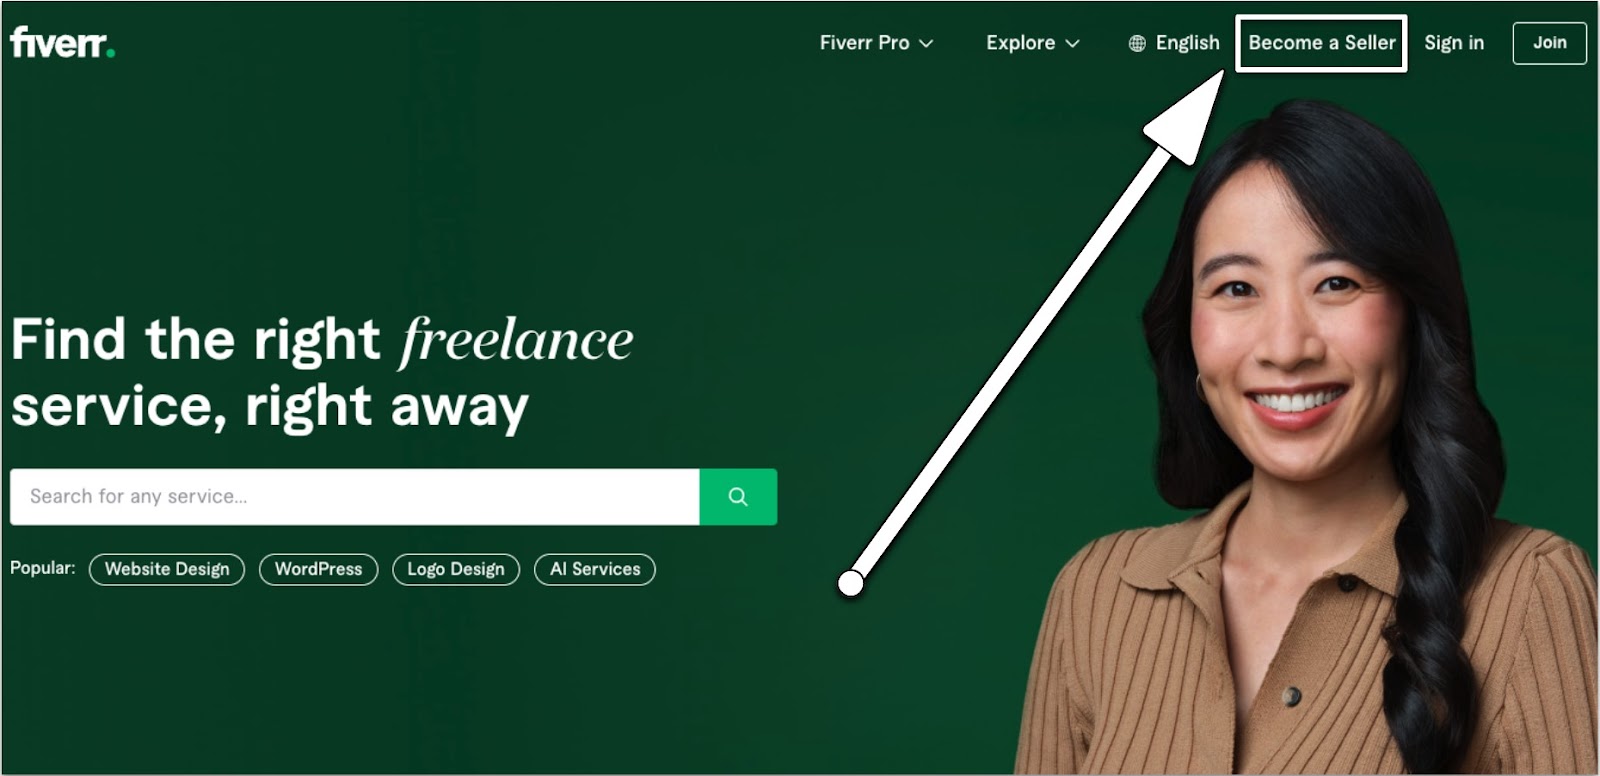 Fiverr homepage with arrow pointing to "Become a Seller" link